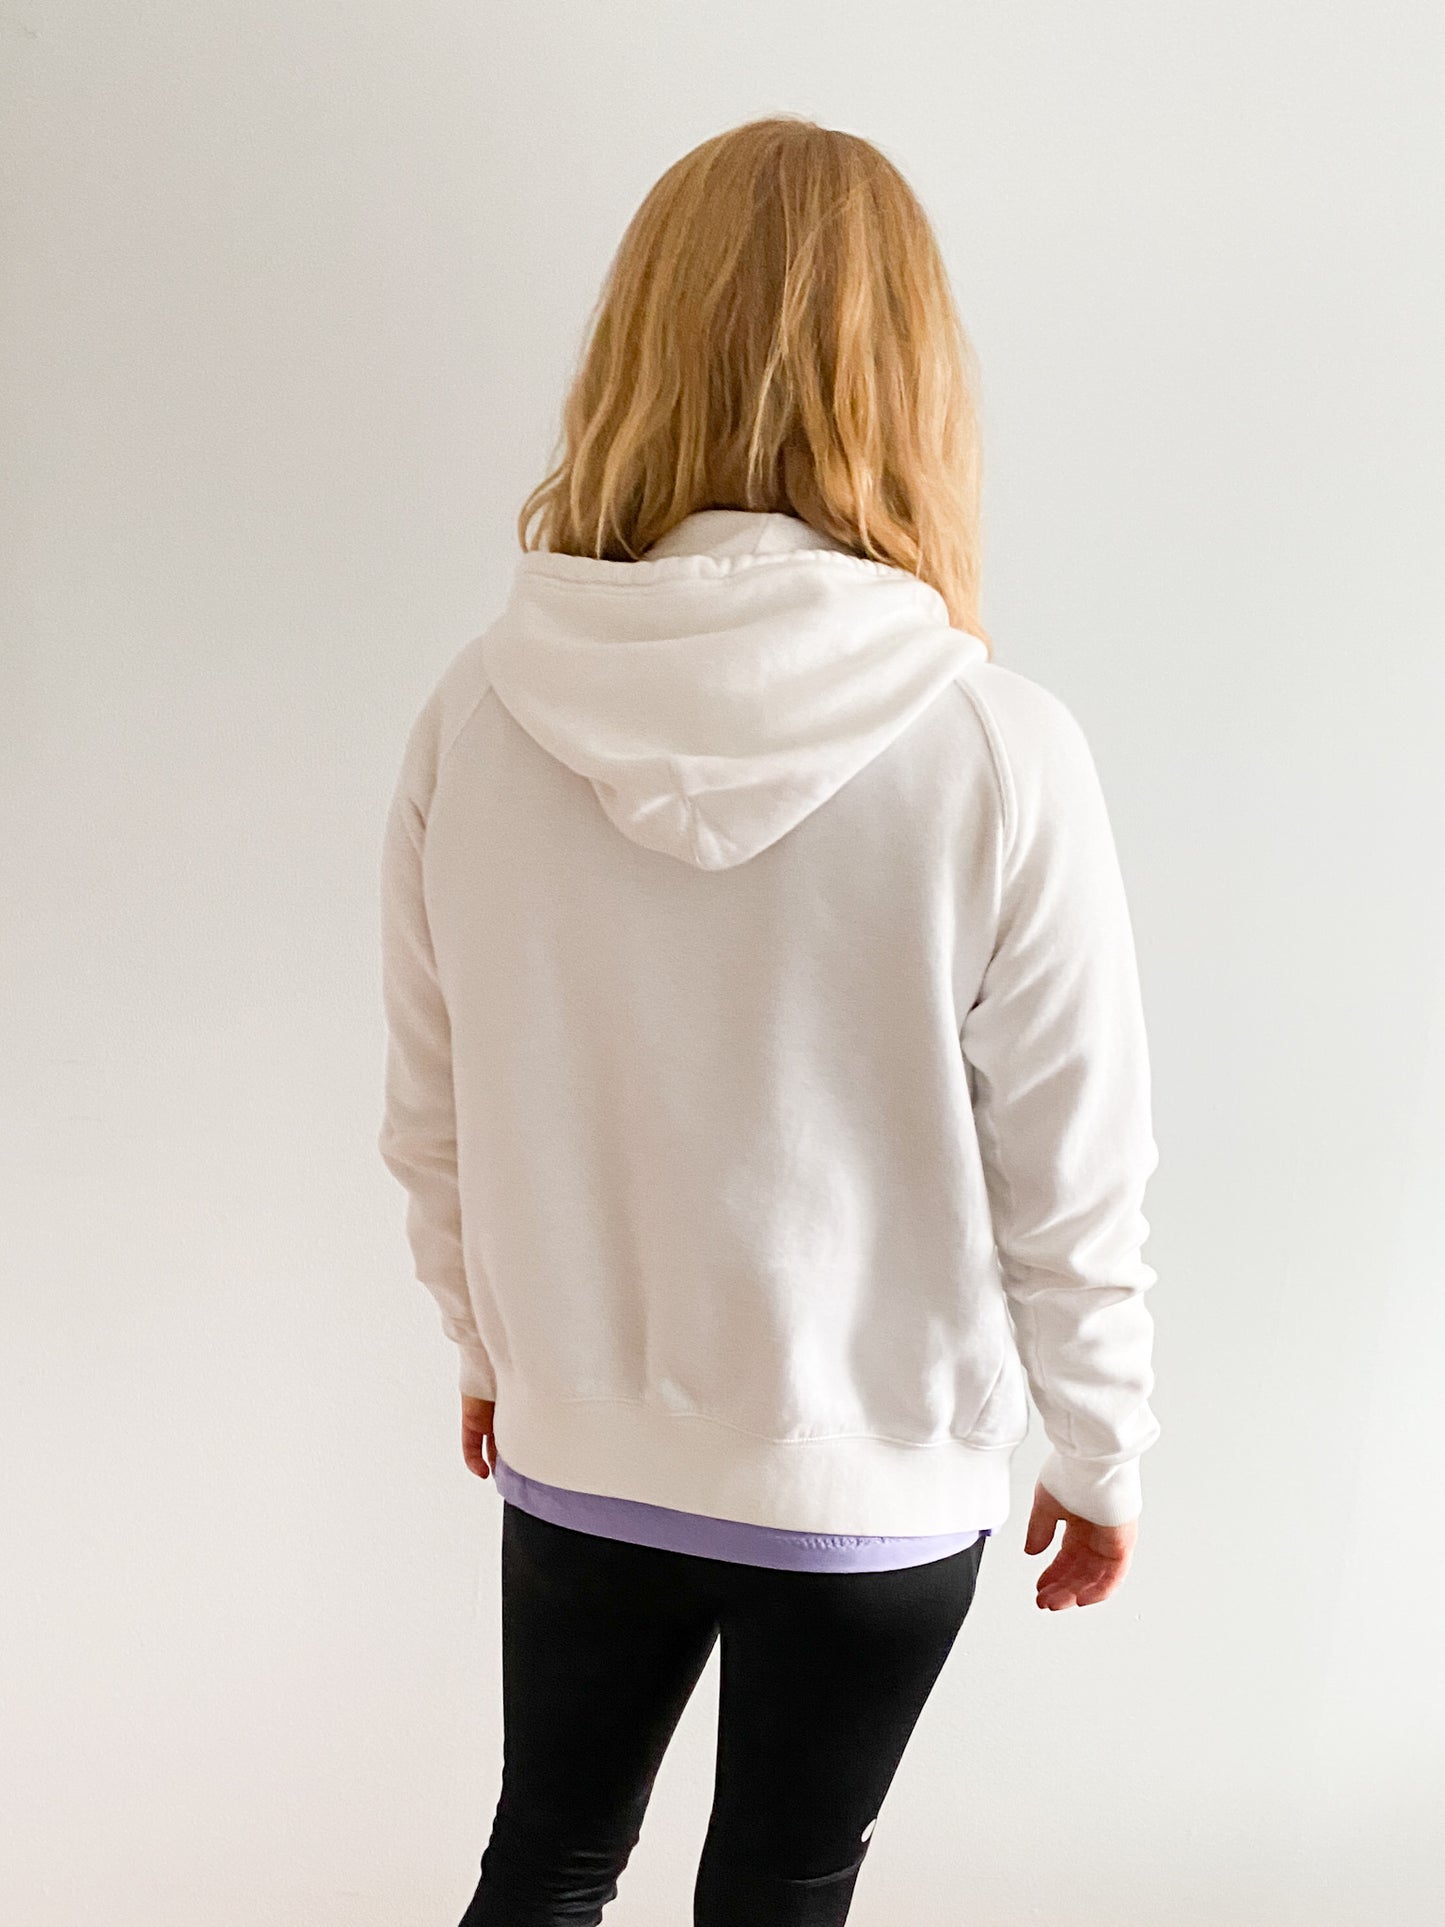 Nike White Cotton Blend Zip Up Hoodie Sweater - Le Prix Fashion & Consulting